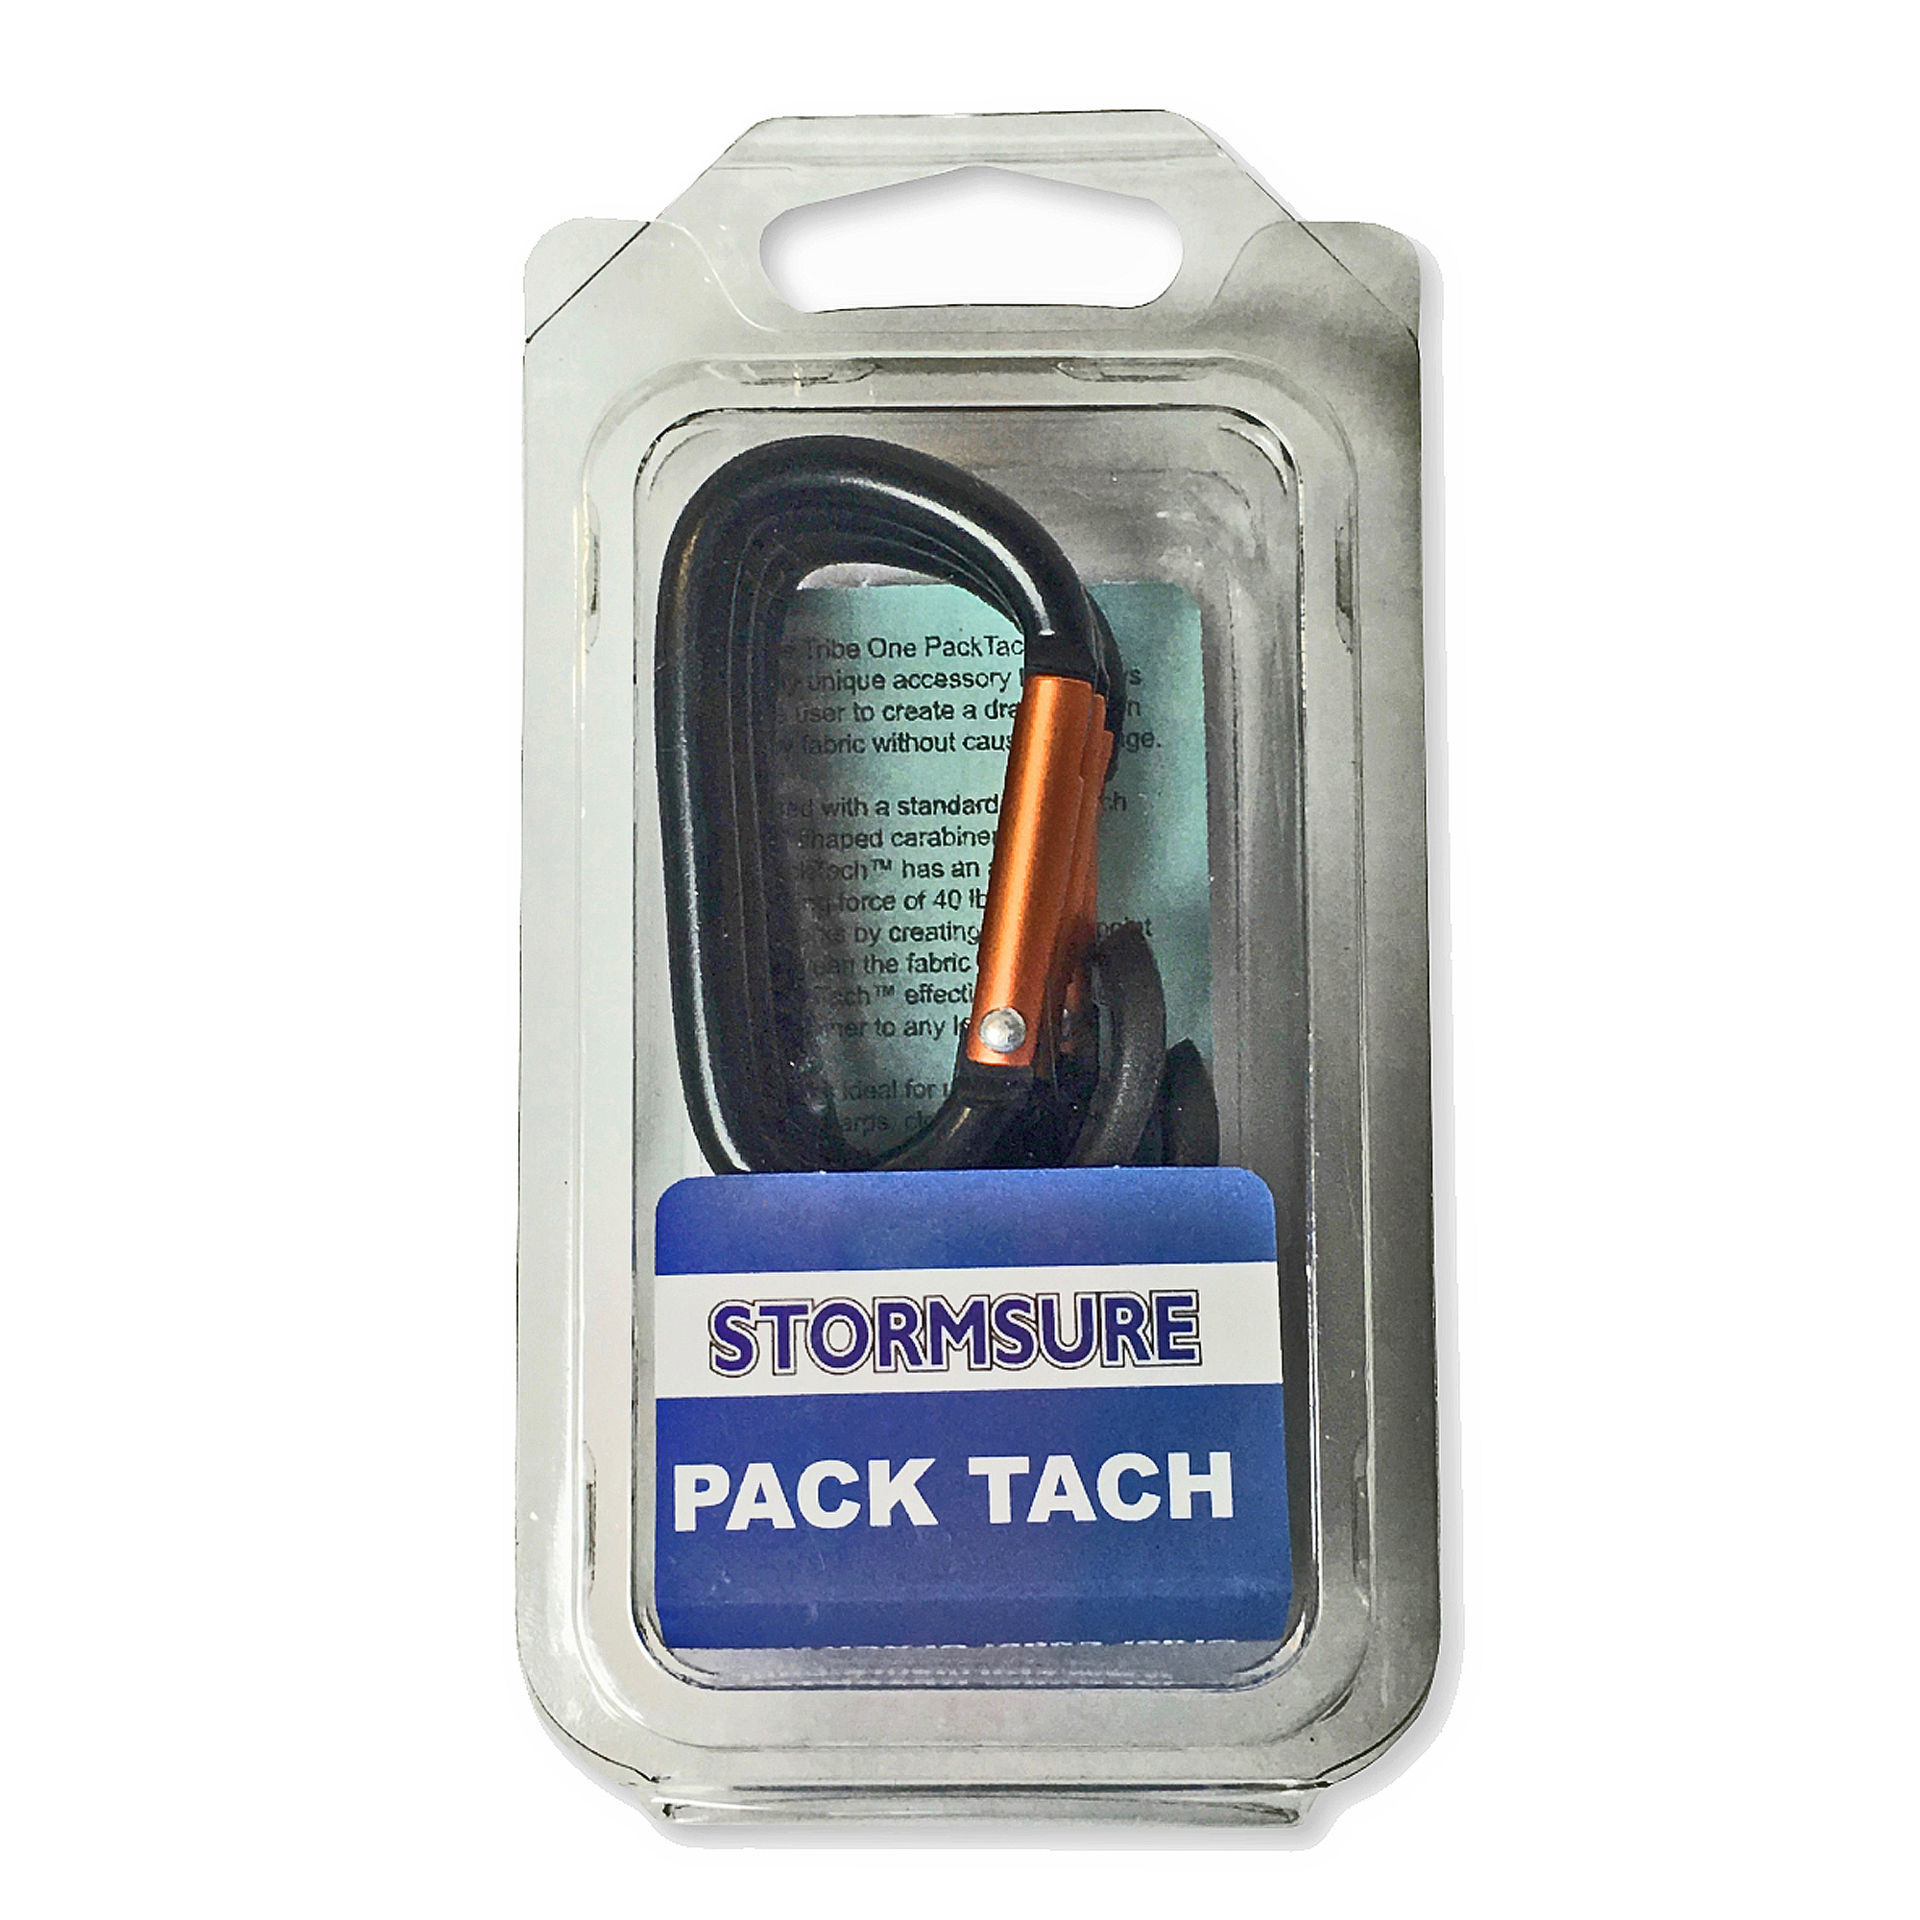 Stormsure PackTach Set of 2